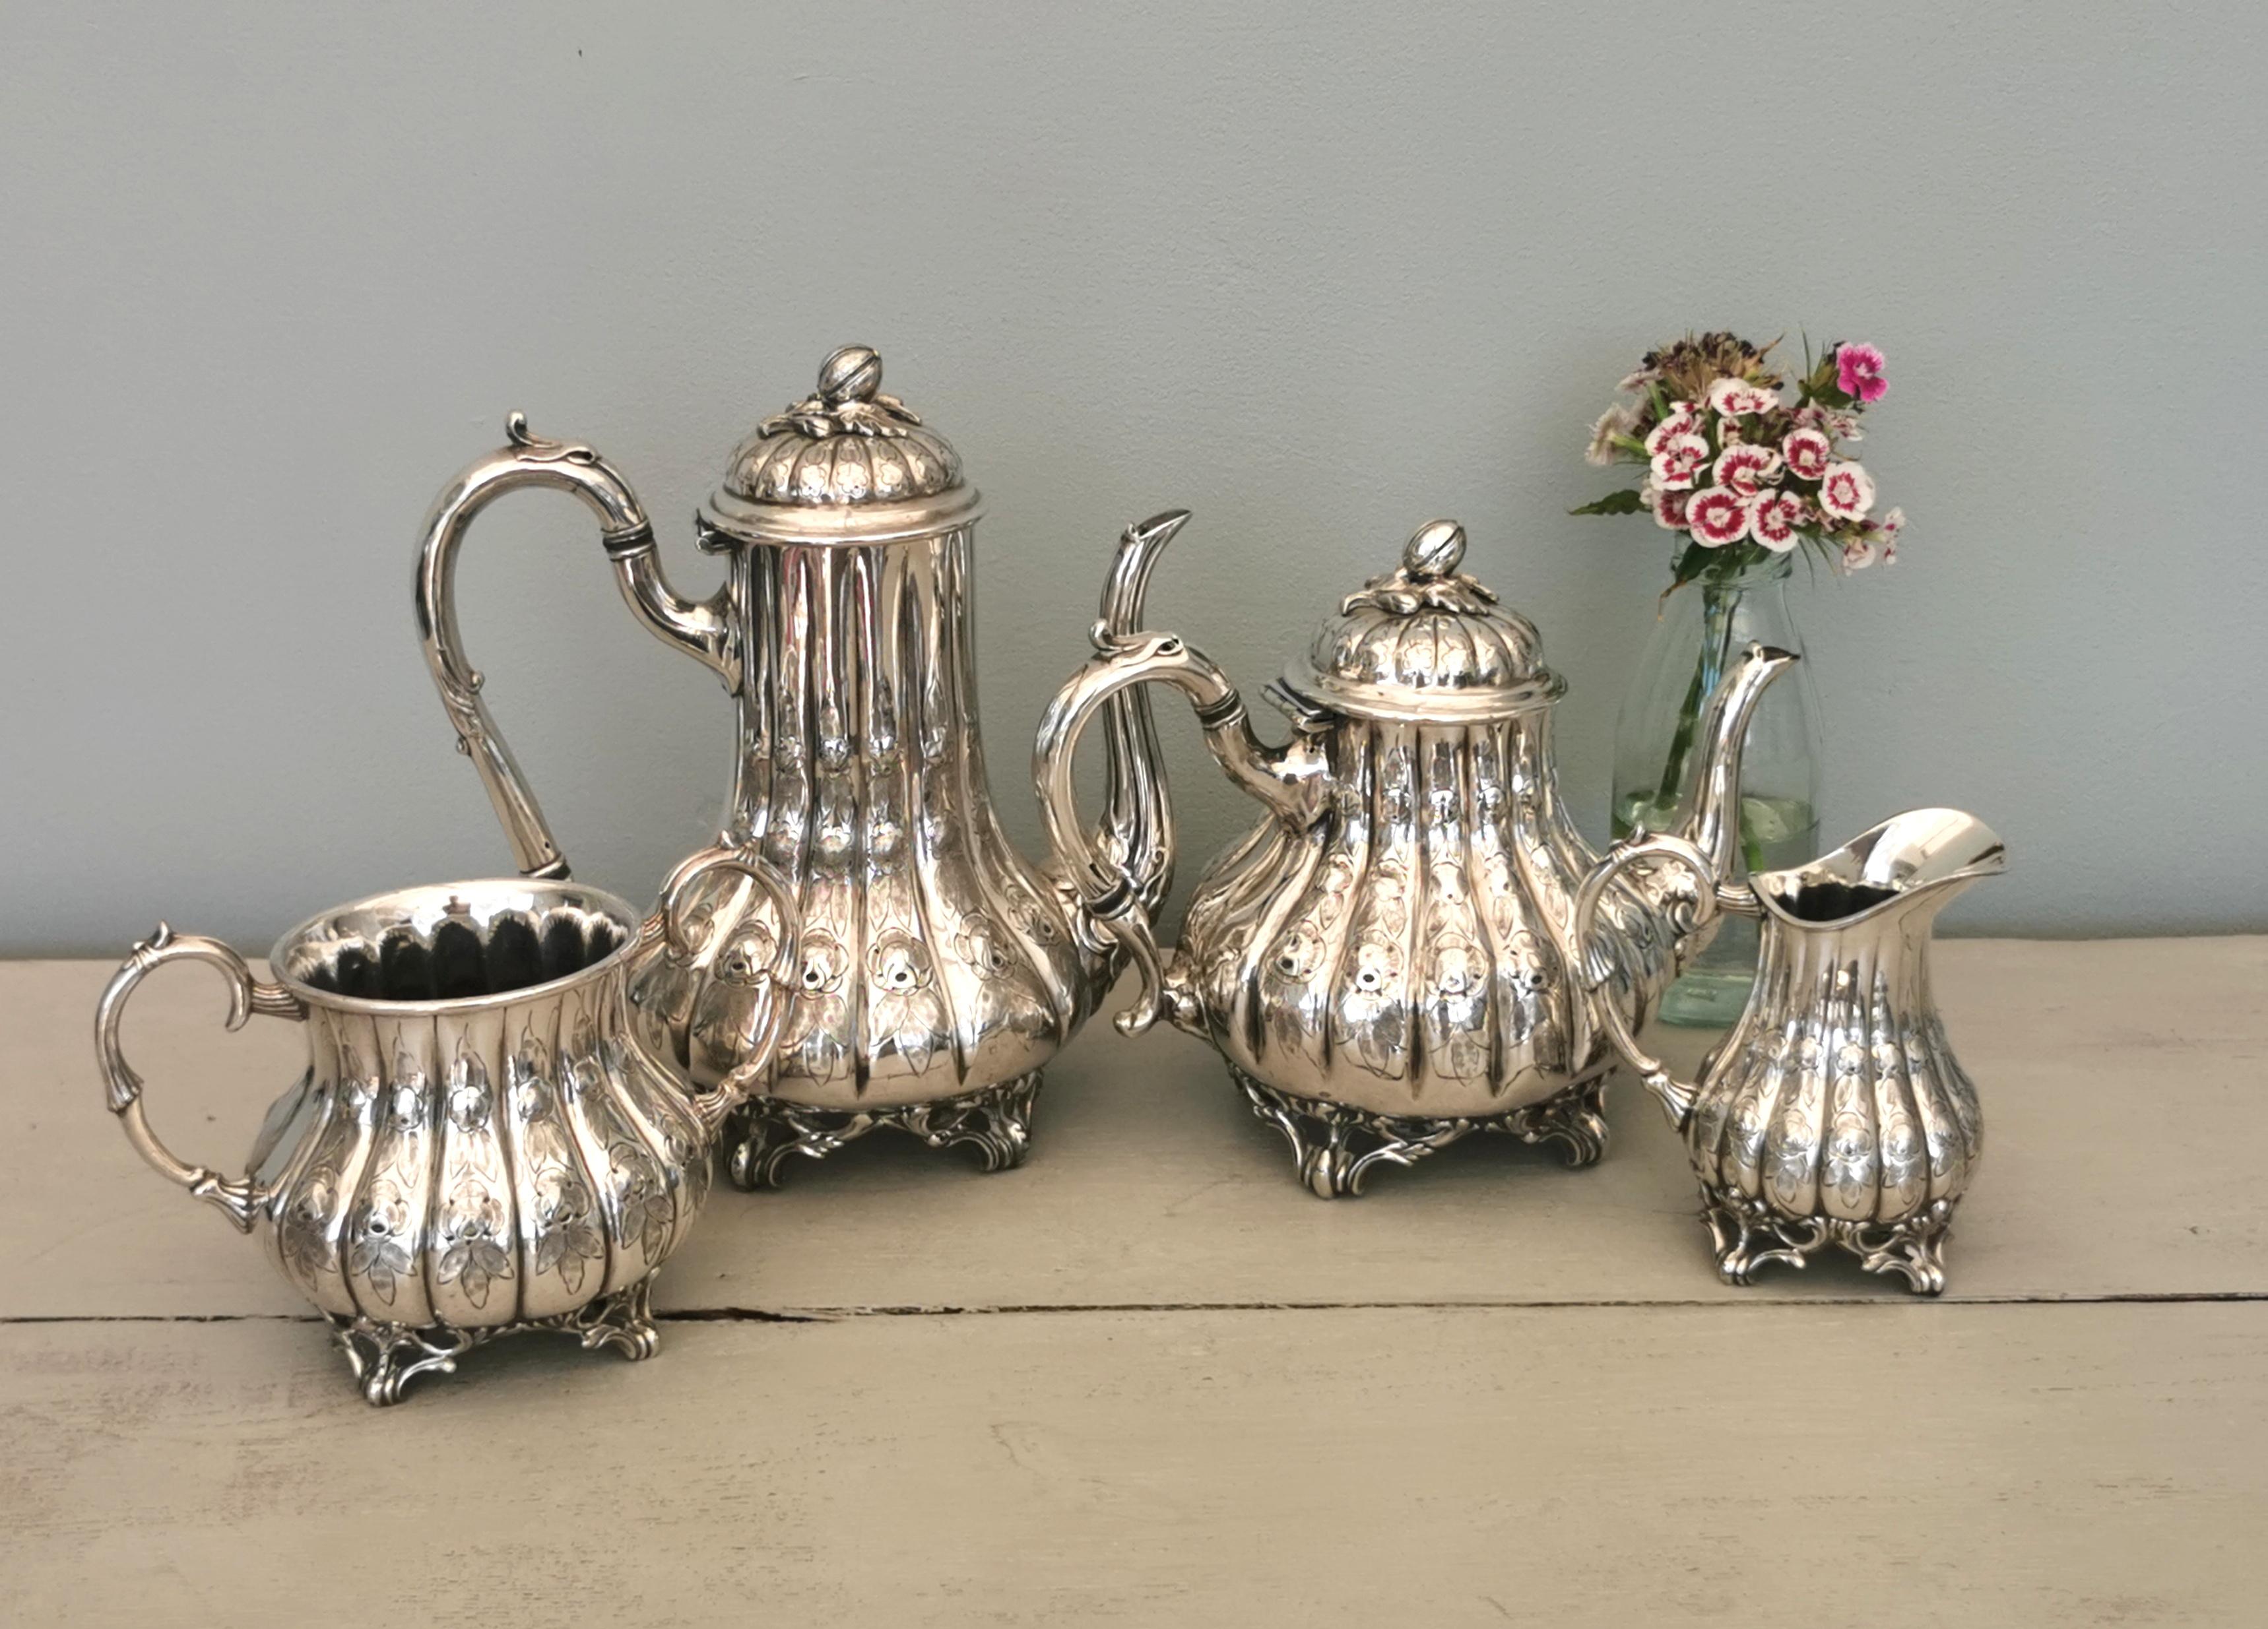 This is one very fine and grand Victorian tea set.

It is a four piece set, very elaborate, the pieces have wide bulbous bases and are each engraved with roses and all stand raised on scroll feet.

The pieces are crafted in very high quality silver